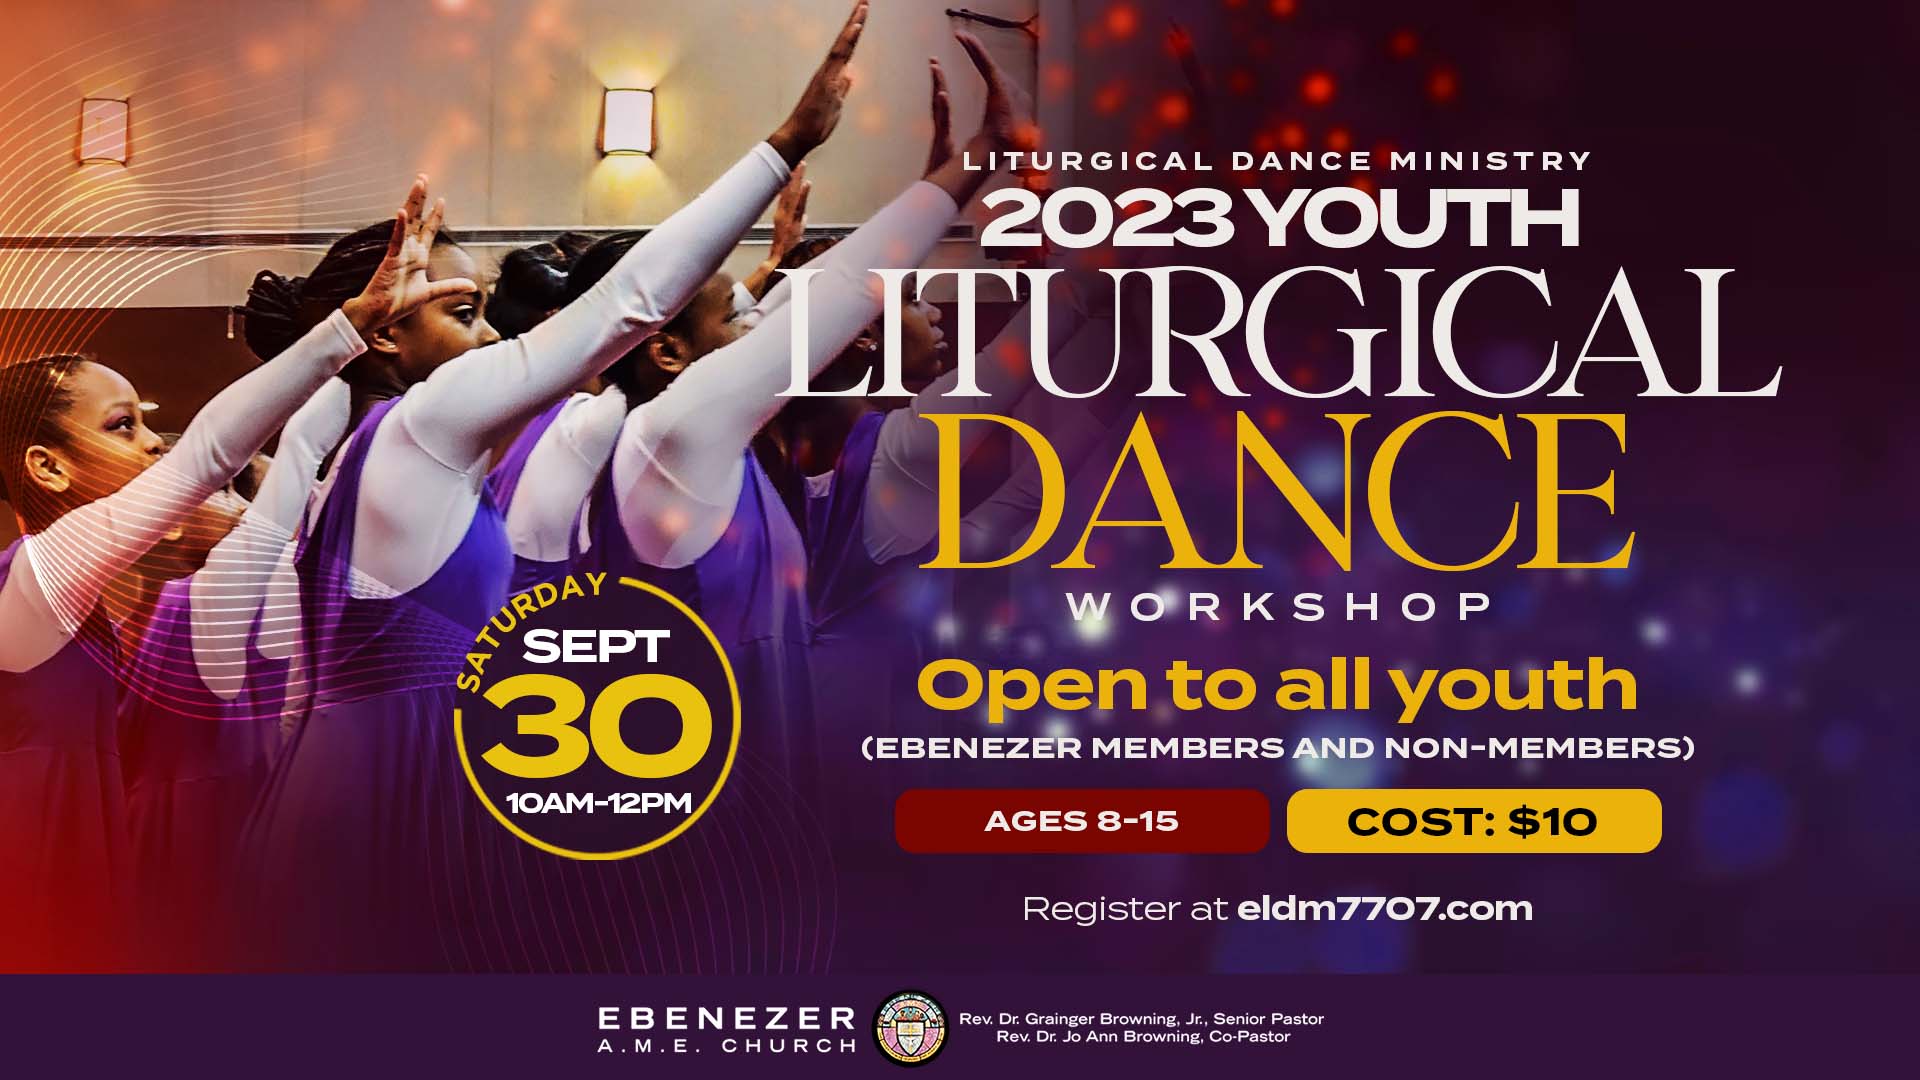 Liturgical Dance Ministry Youth Dance Workshop